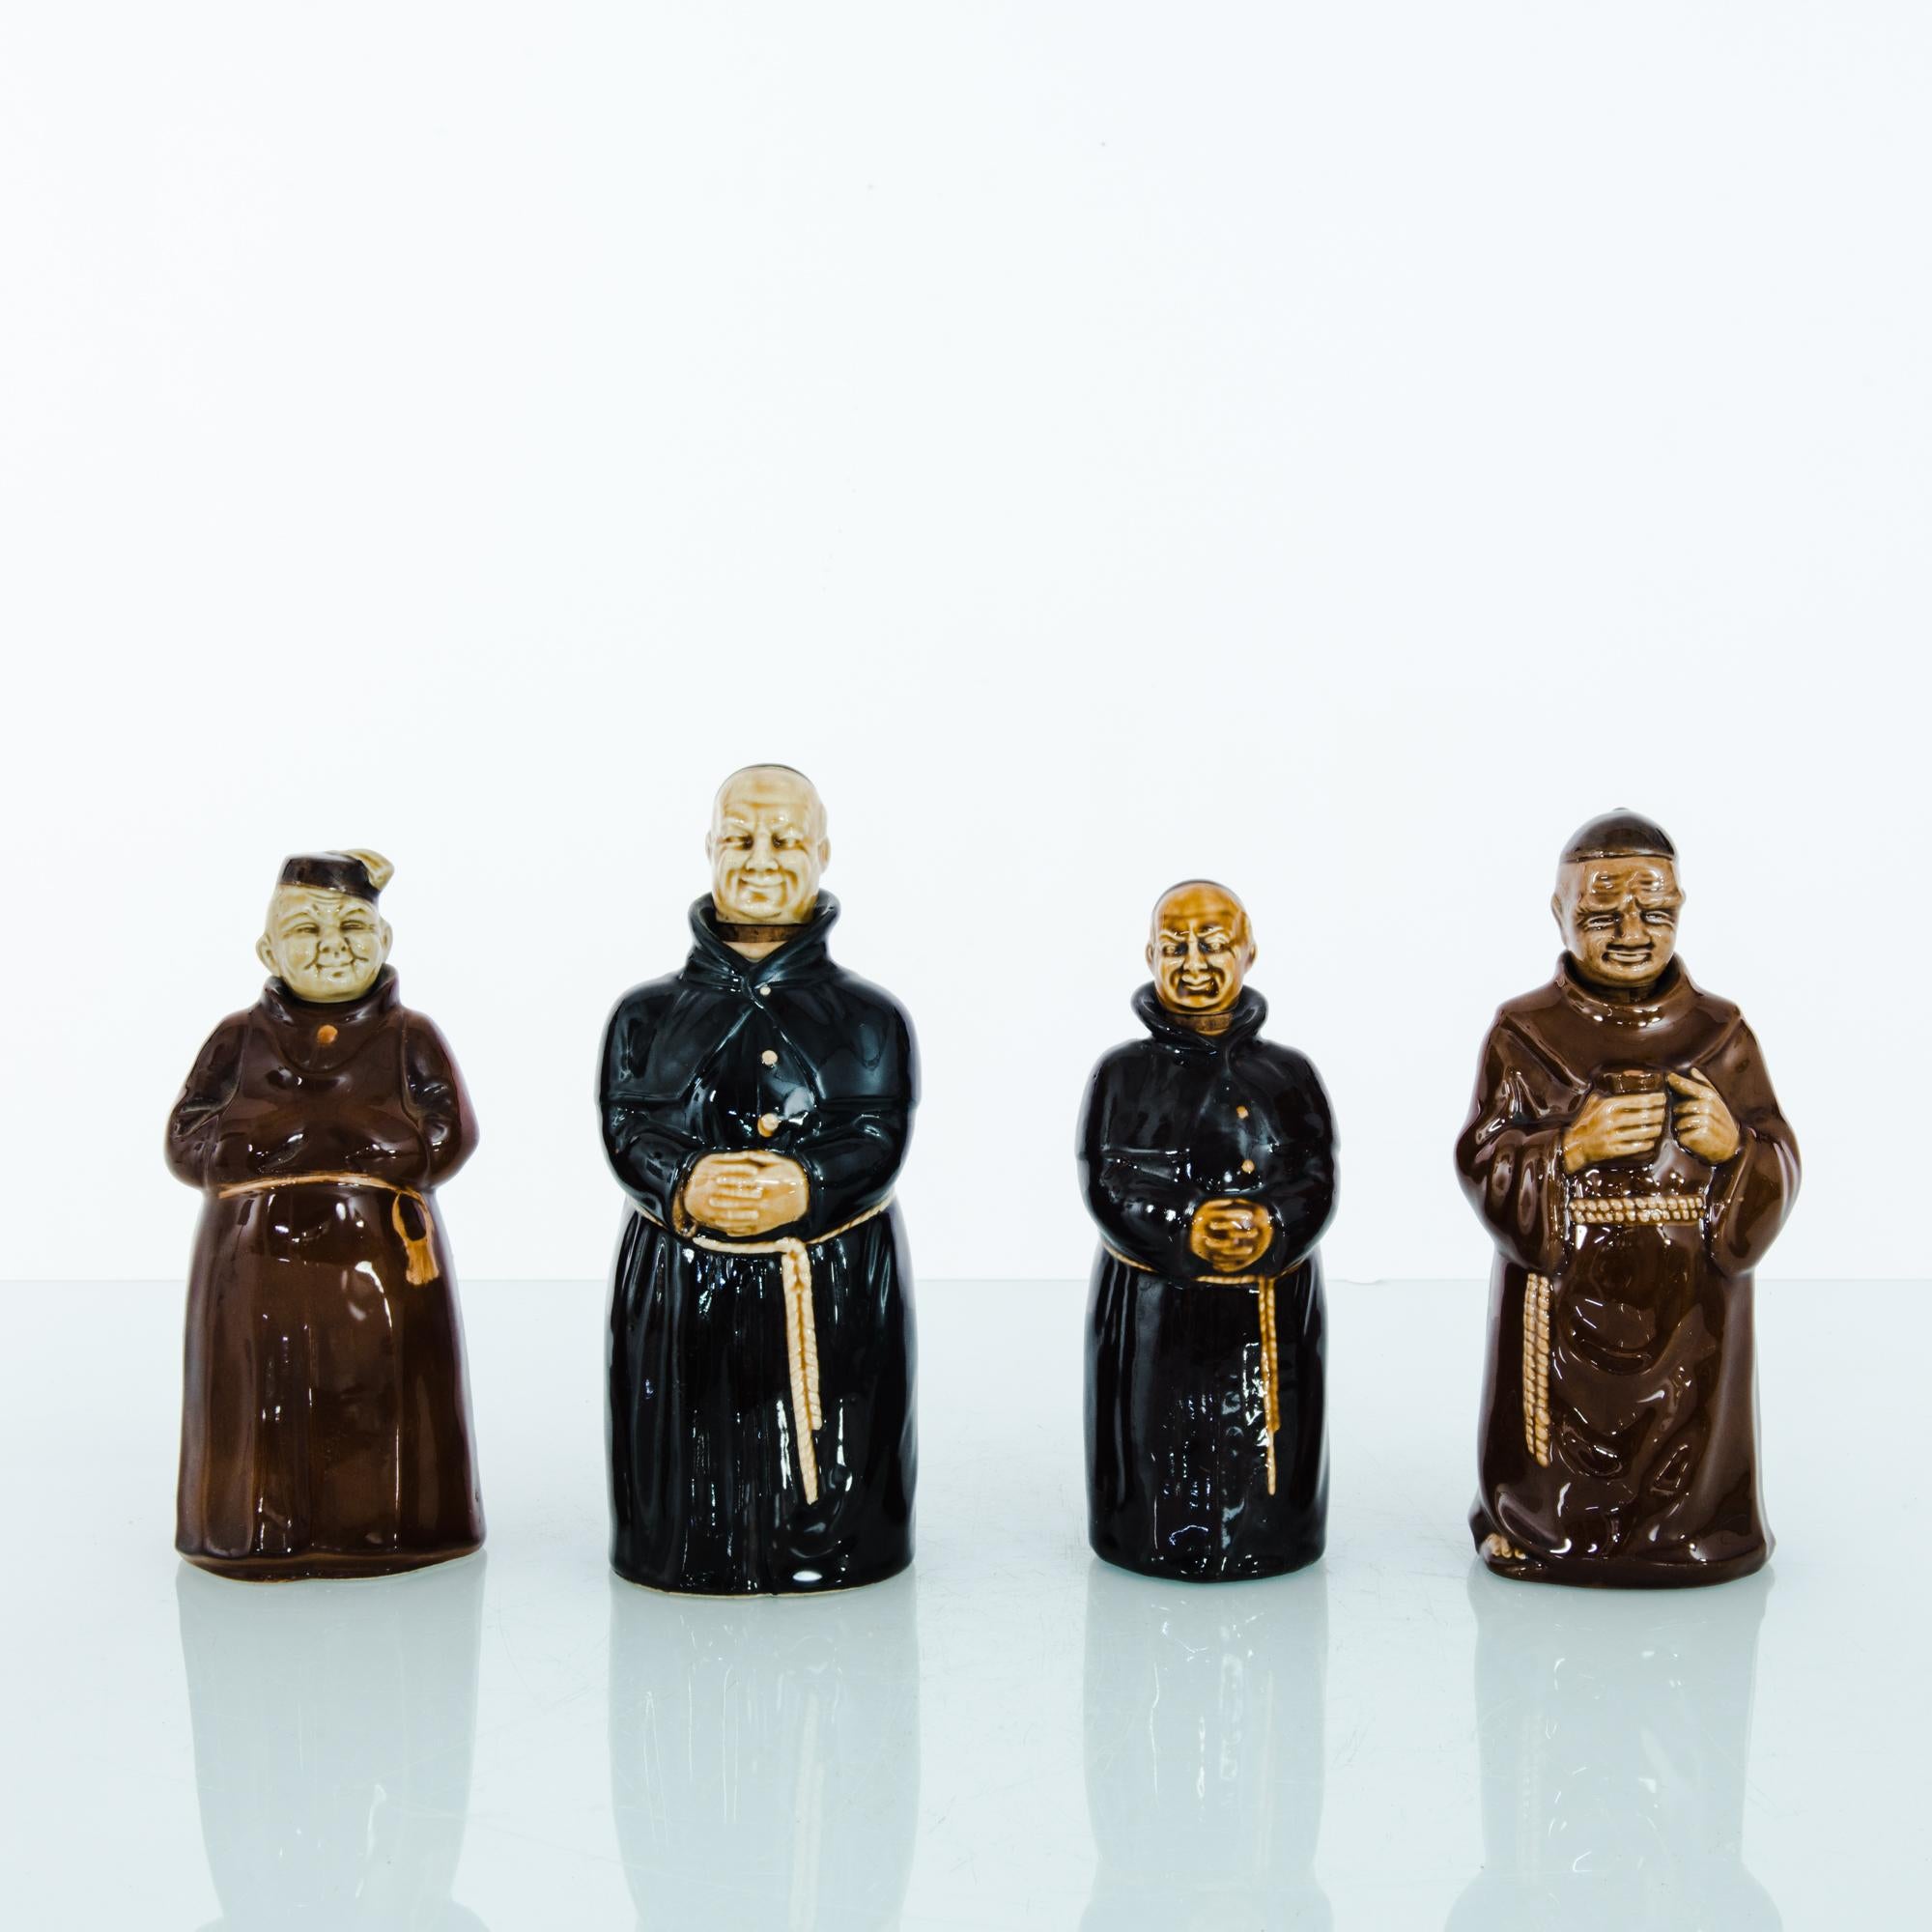 An set of French ceramic bottles, made between 1950 and 1970, in the shape of dark robed friars. Glazed in vivid colors, each bottle has a unique personality. Originally intended to store liquors, these spirited caricatures make an appealing vintage